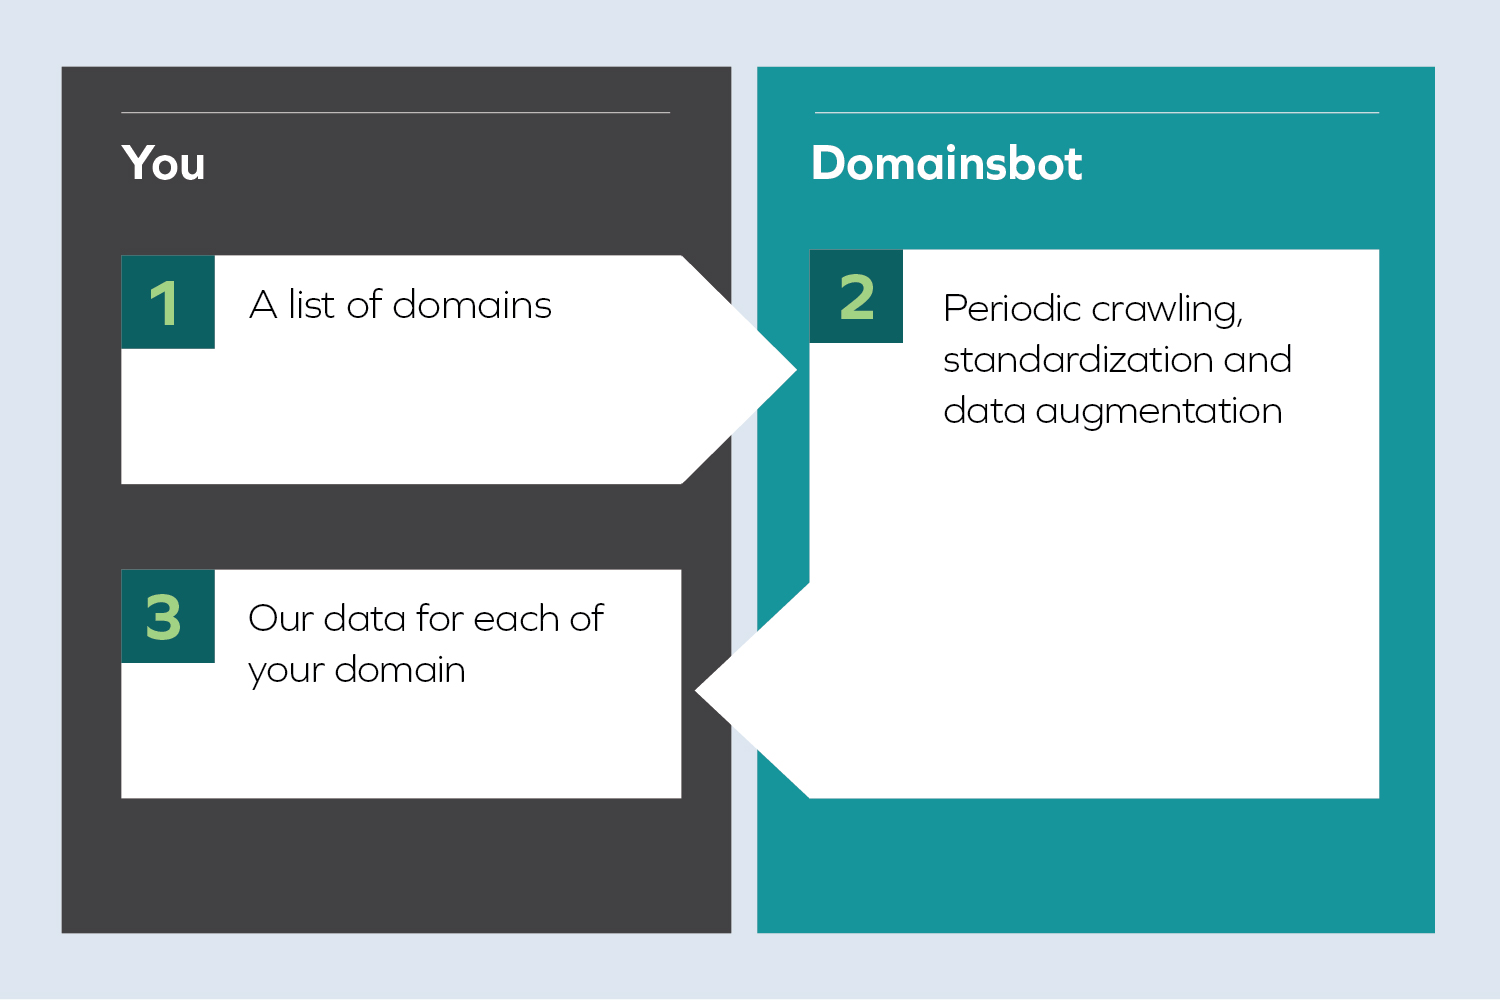 Data Provisioning Snapshots Diagram: 1) you provide a list of domains; 2) Domainsbot provides periodic crawling, standardization and data augmentation; 3) you get Domainsbot data for each of your domains